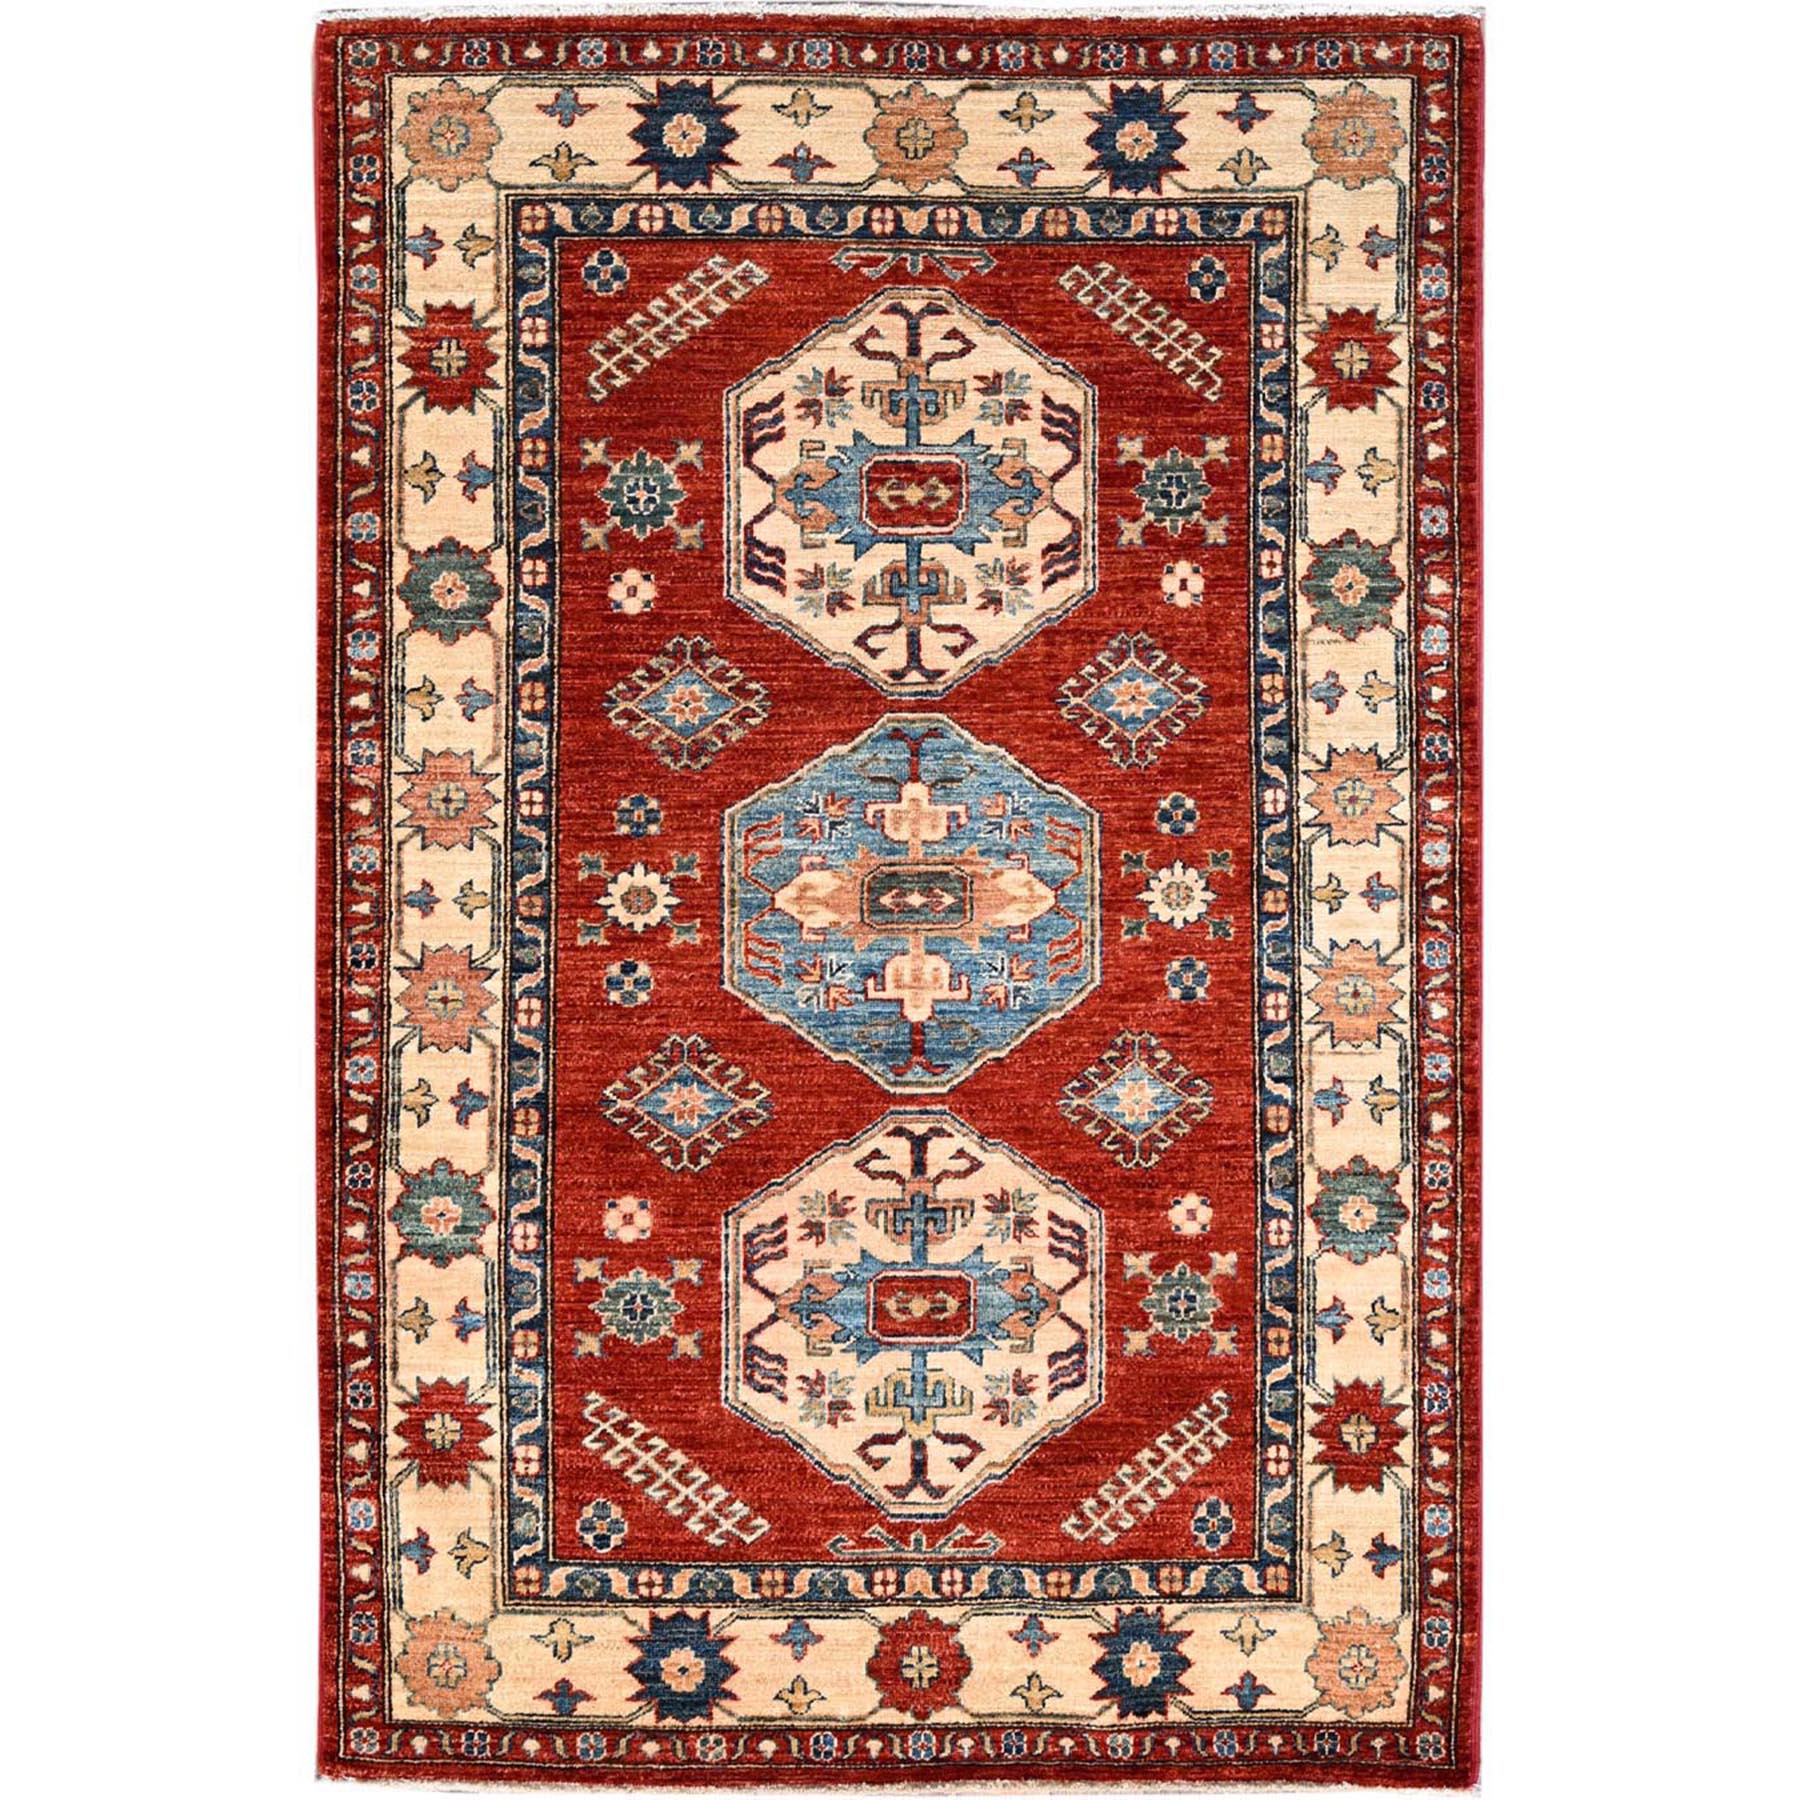  Wool Hand-Knotted Area Rug 3'11